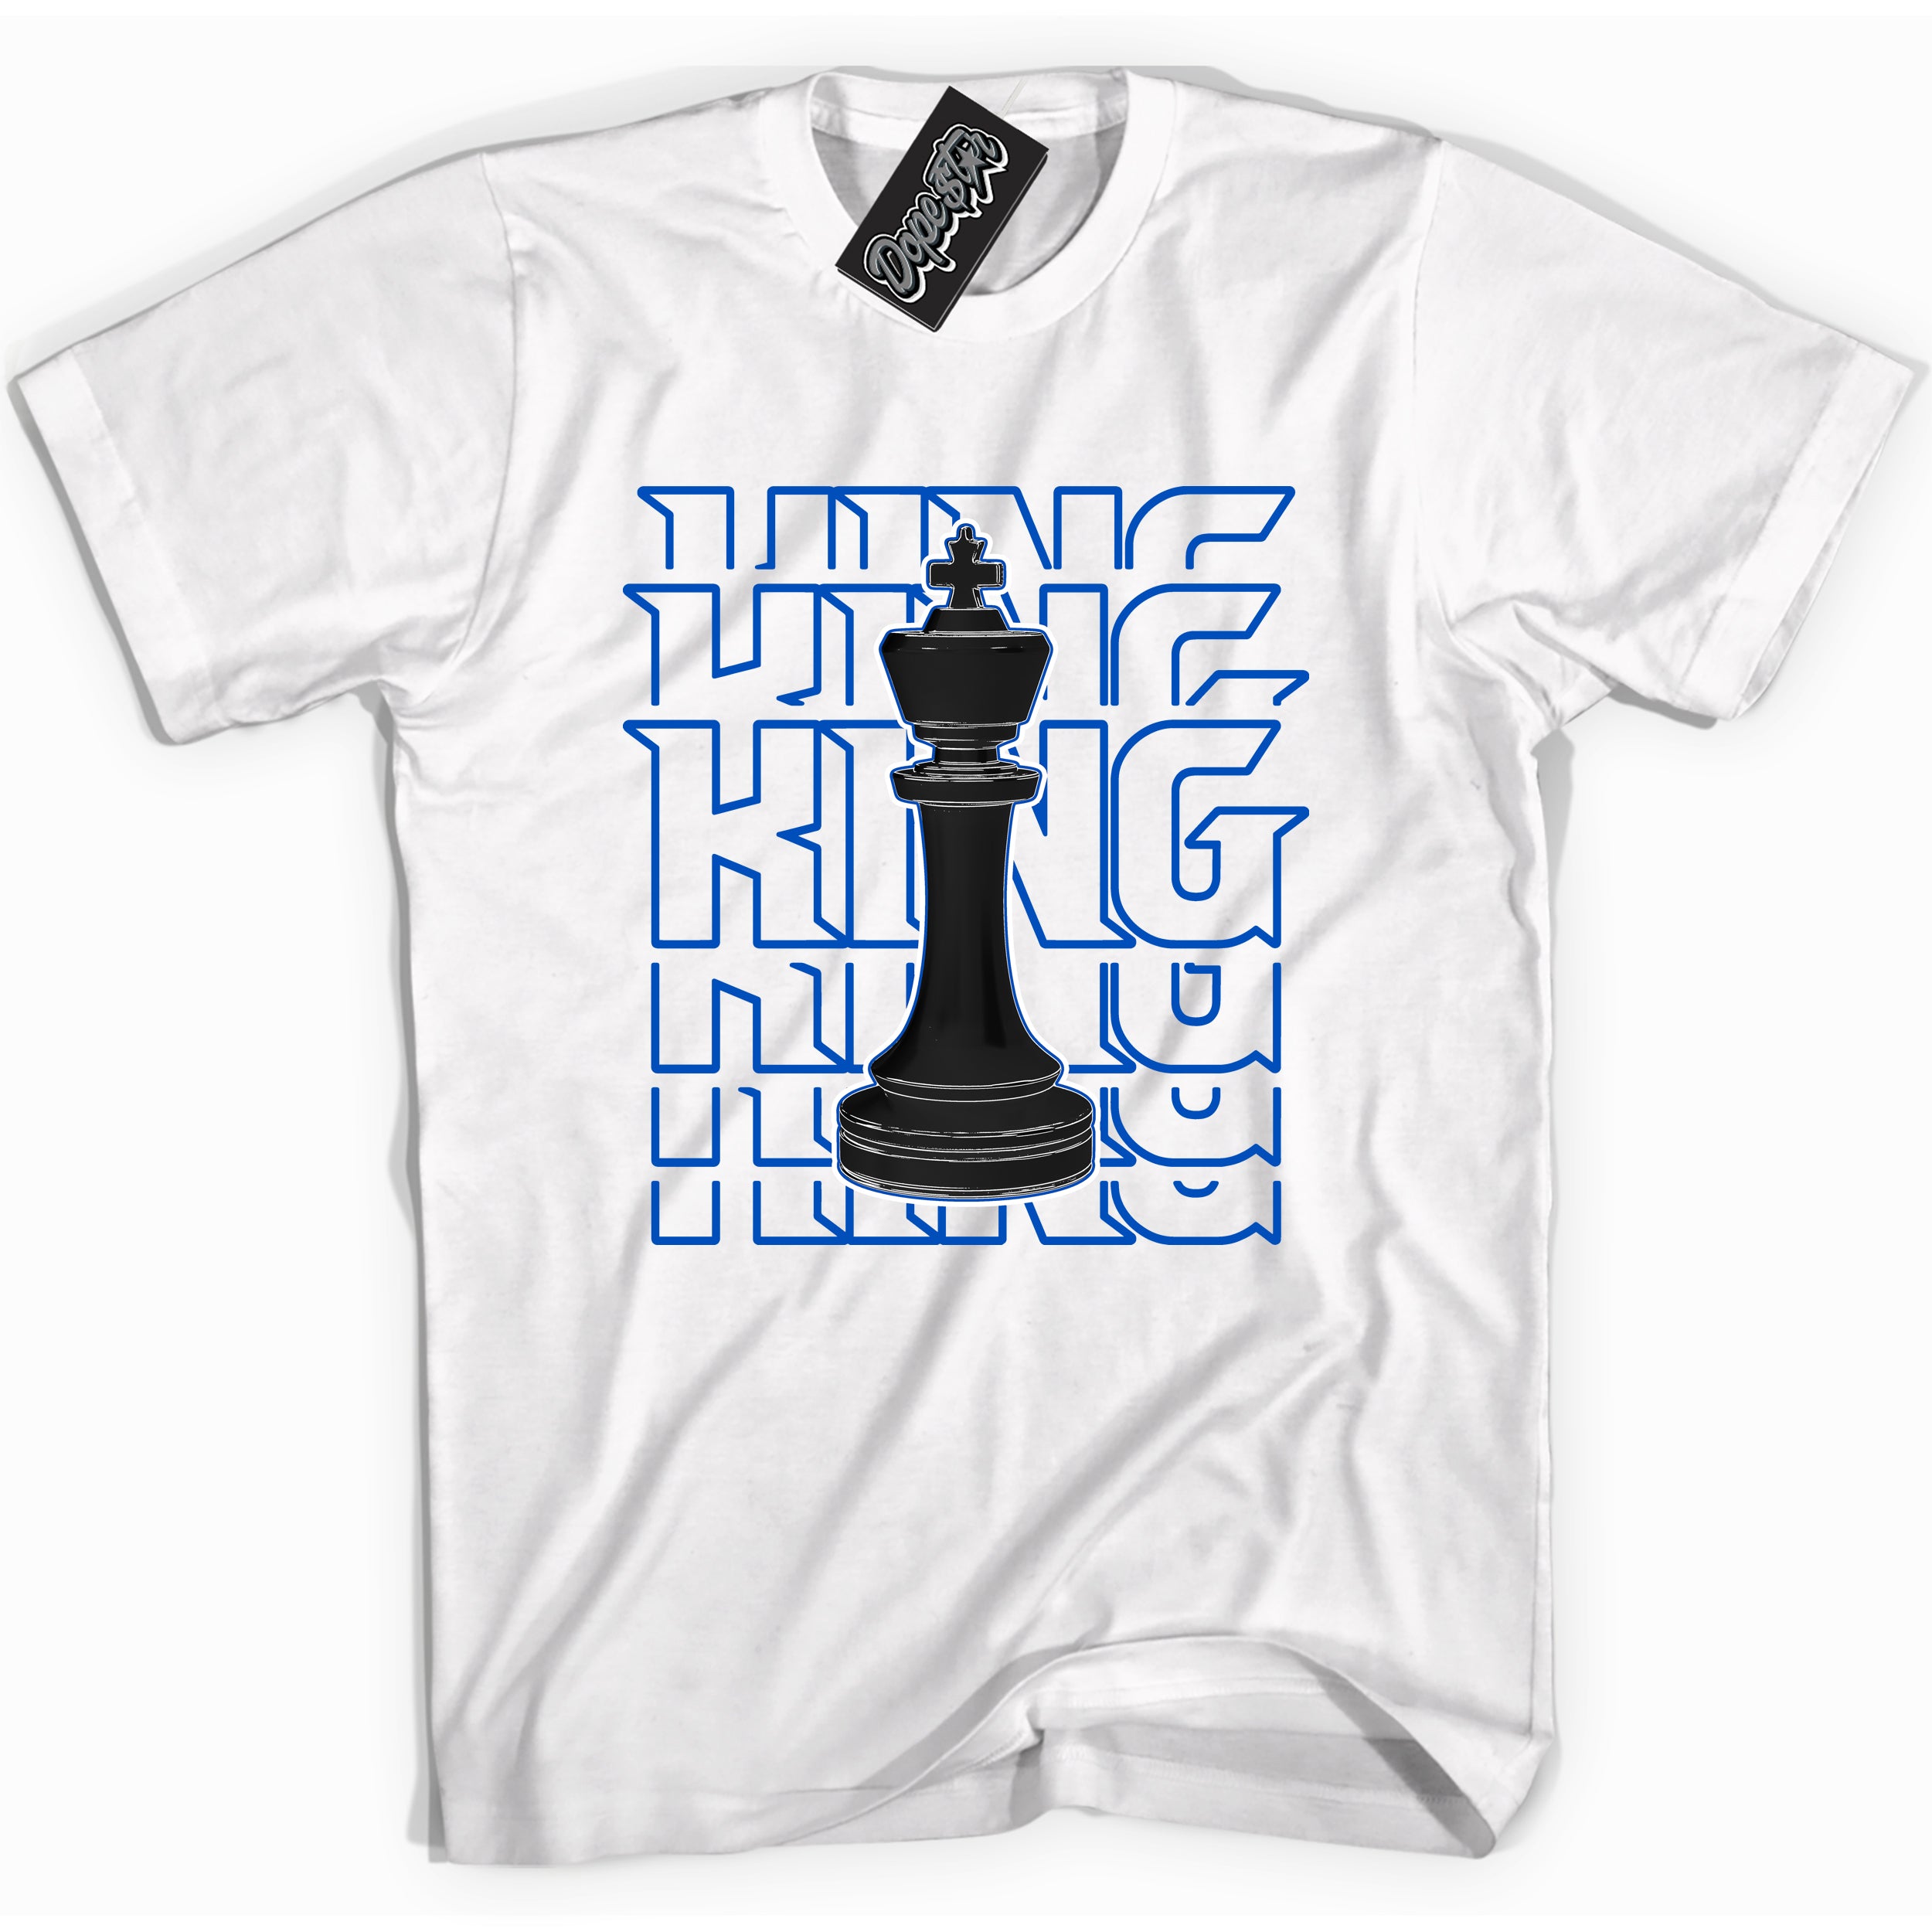 Cool White graphic tee with "King Chess" design, that perfectly matches Royal Reimagined 1s sneakers 